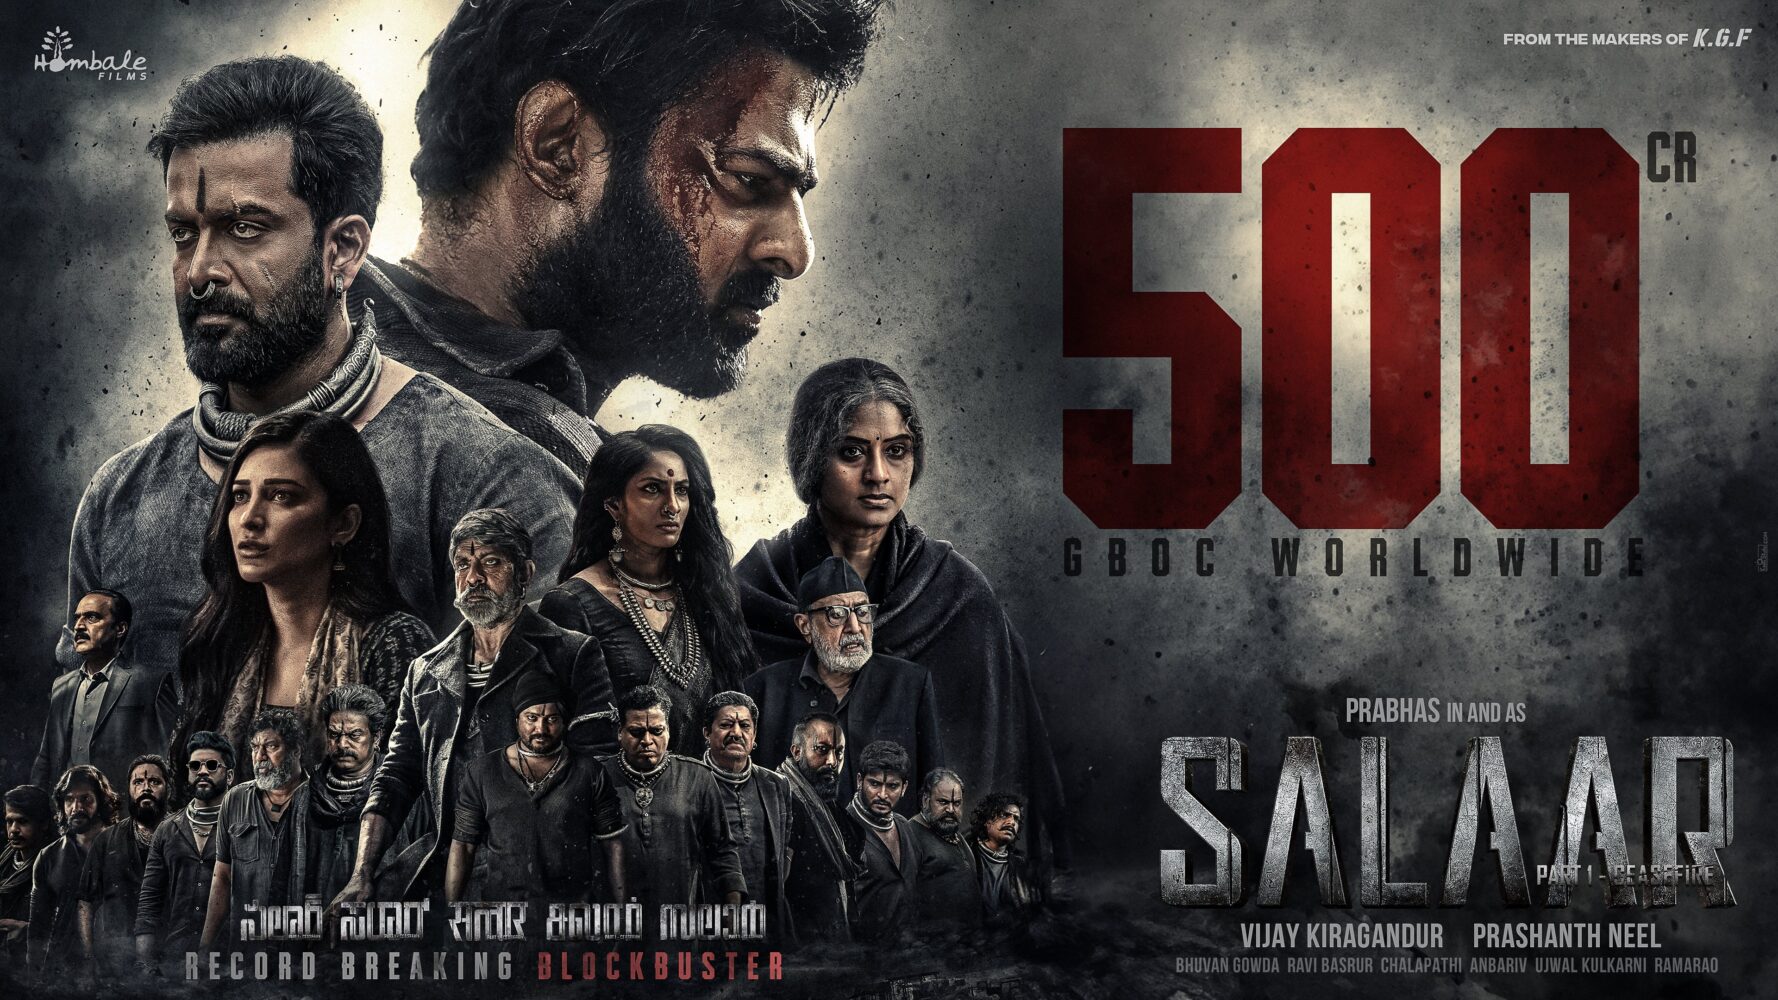 SALAAR @500 CRORE, Movie continues its strong hold